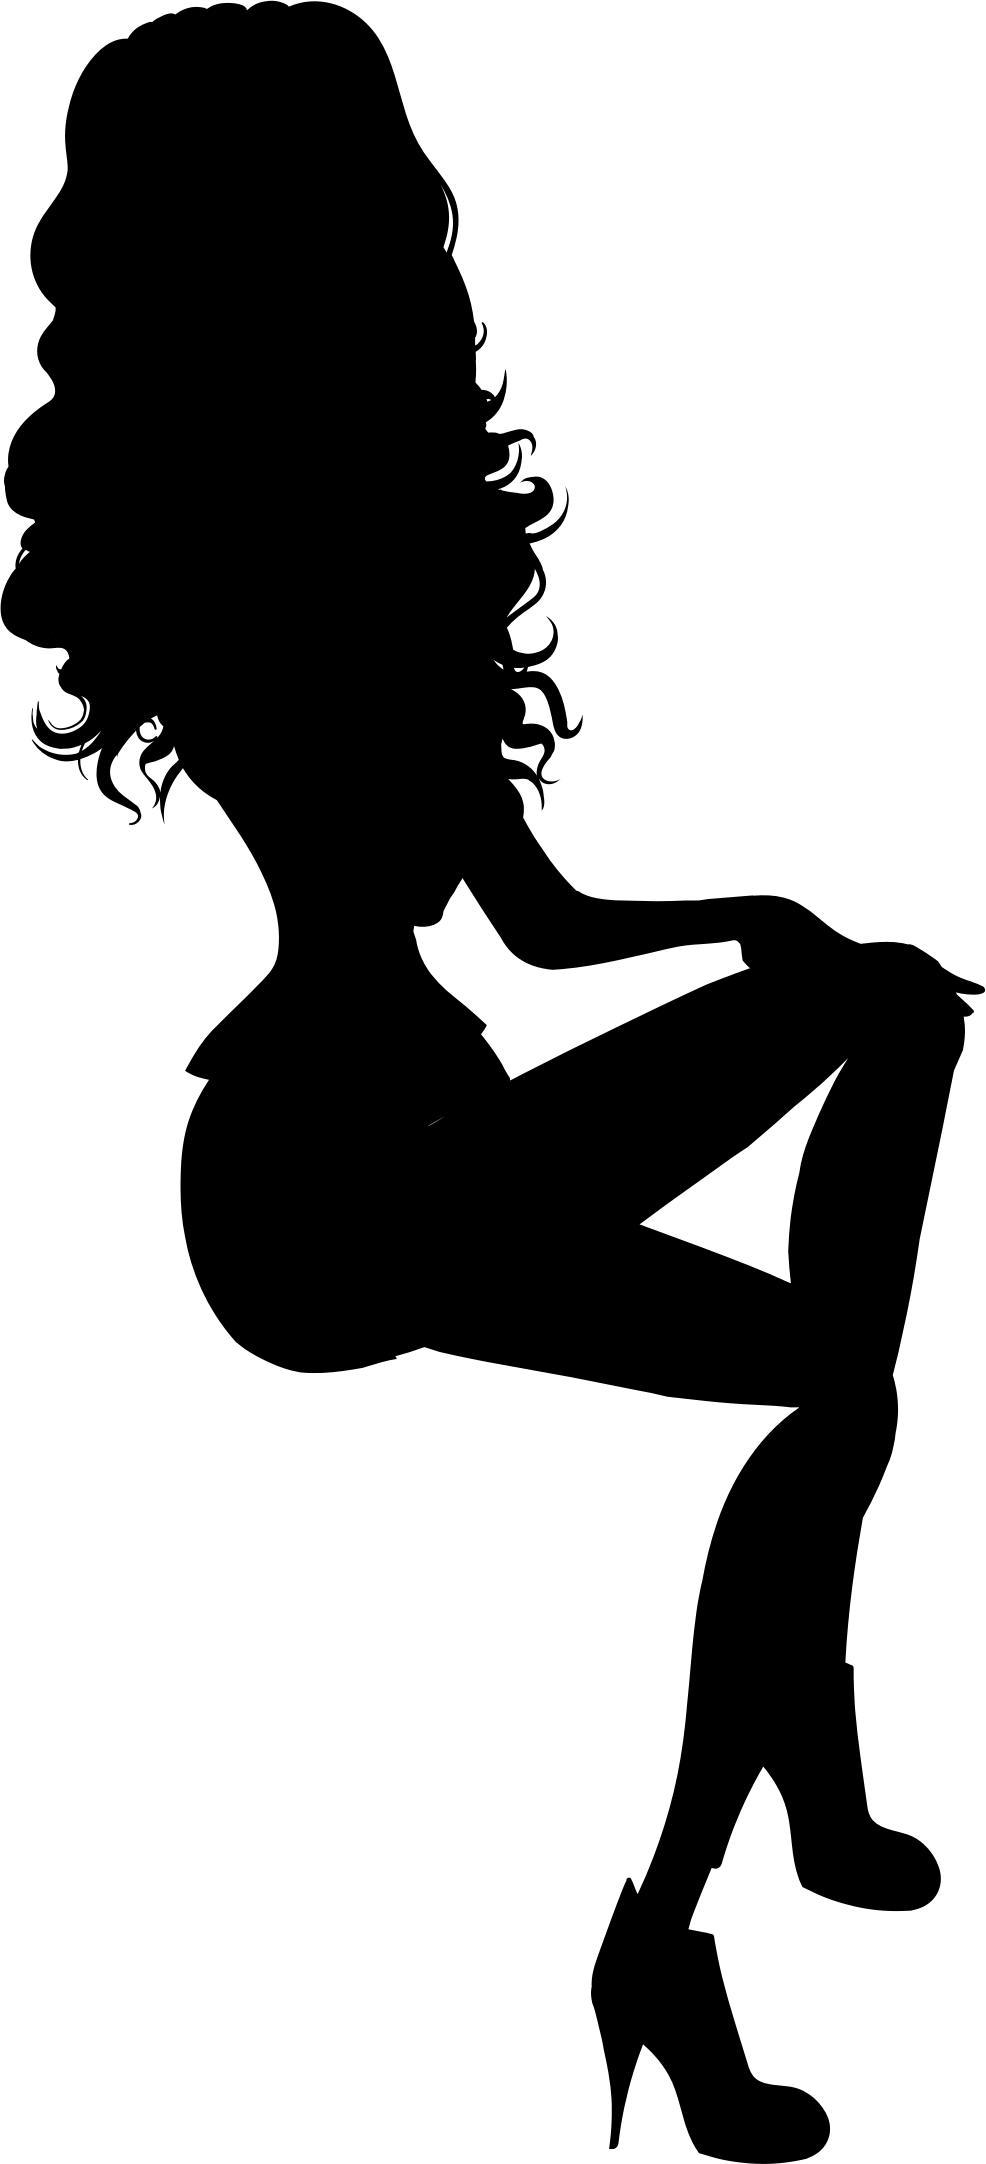 Sitting Woman Silhouette No Chair png transparent